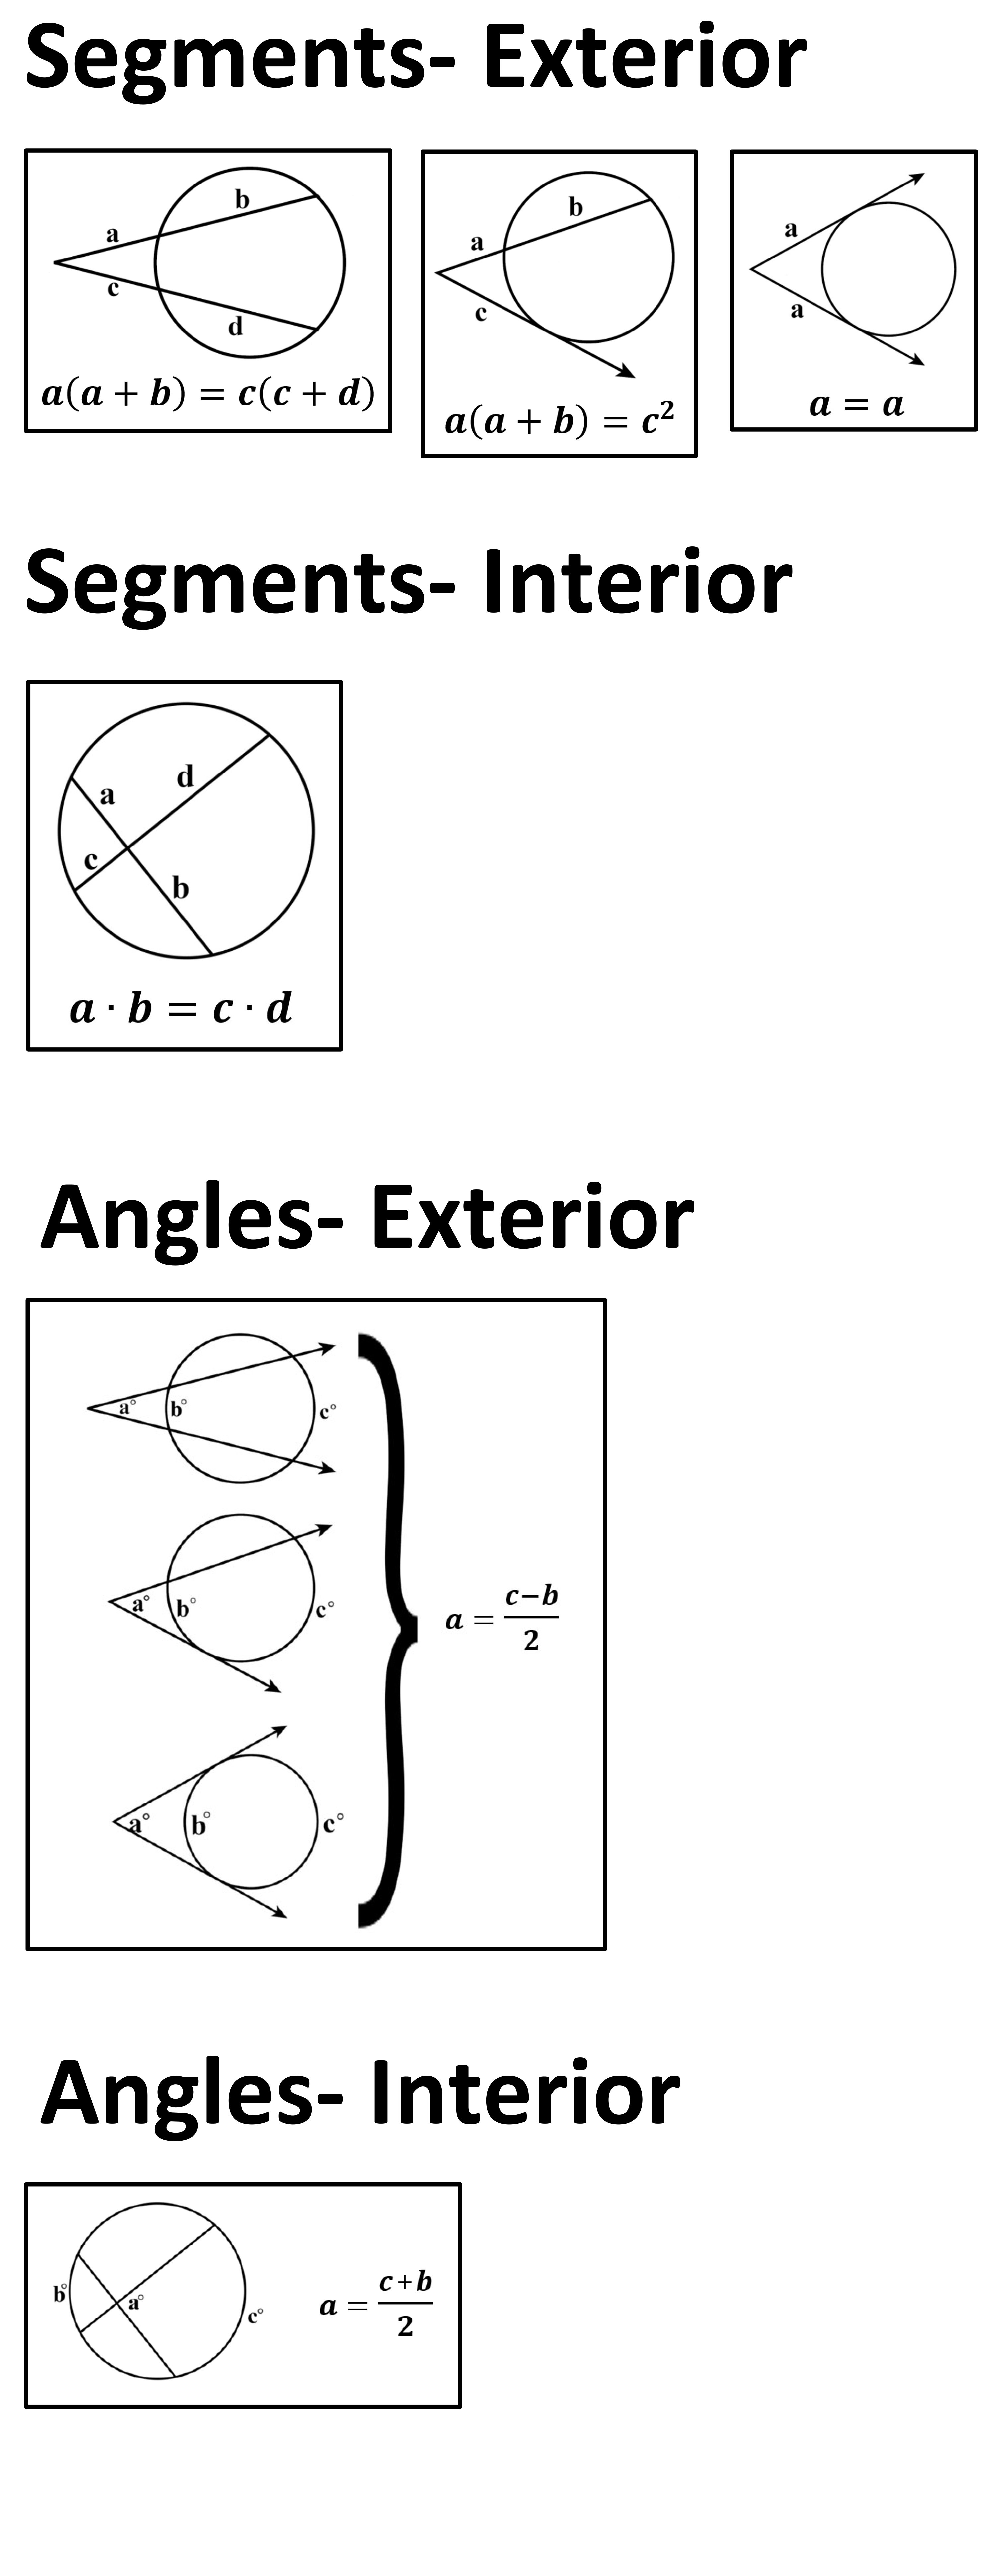 Notes for Segments and Angles in Circles